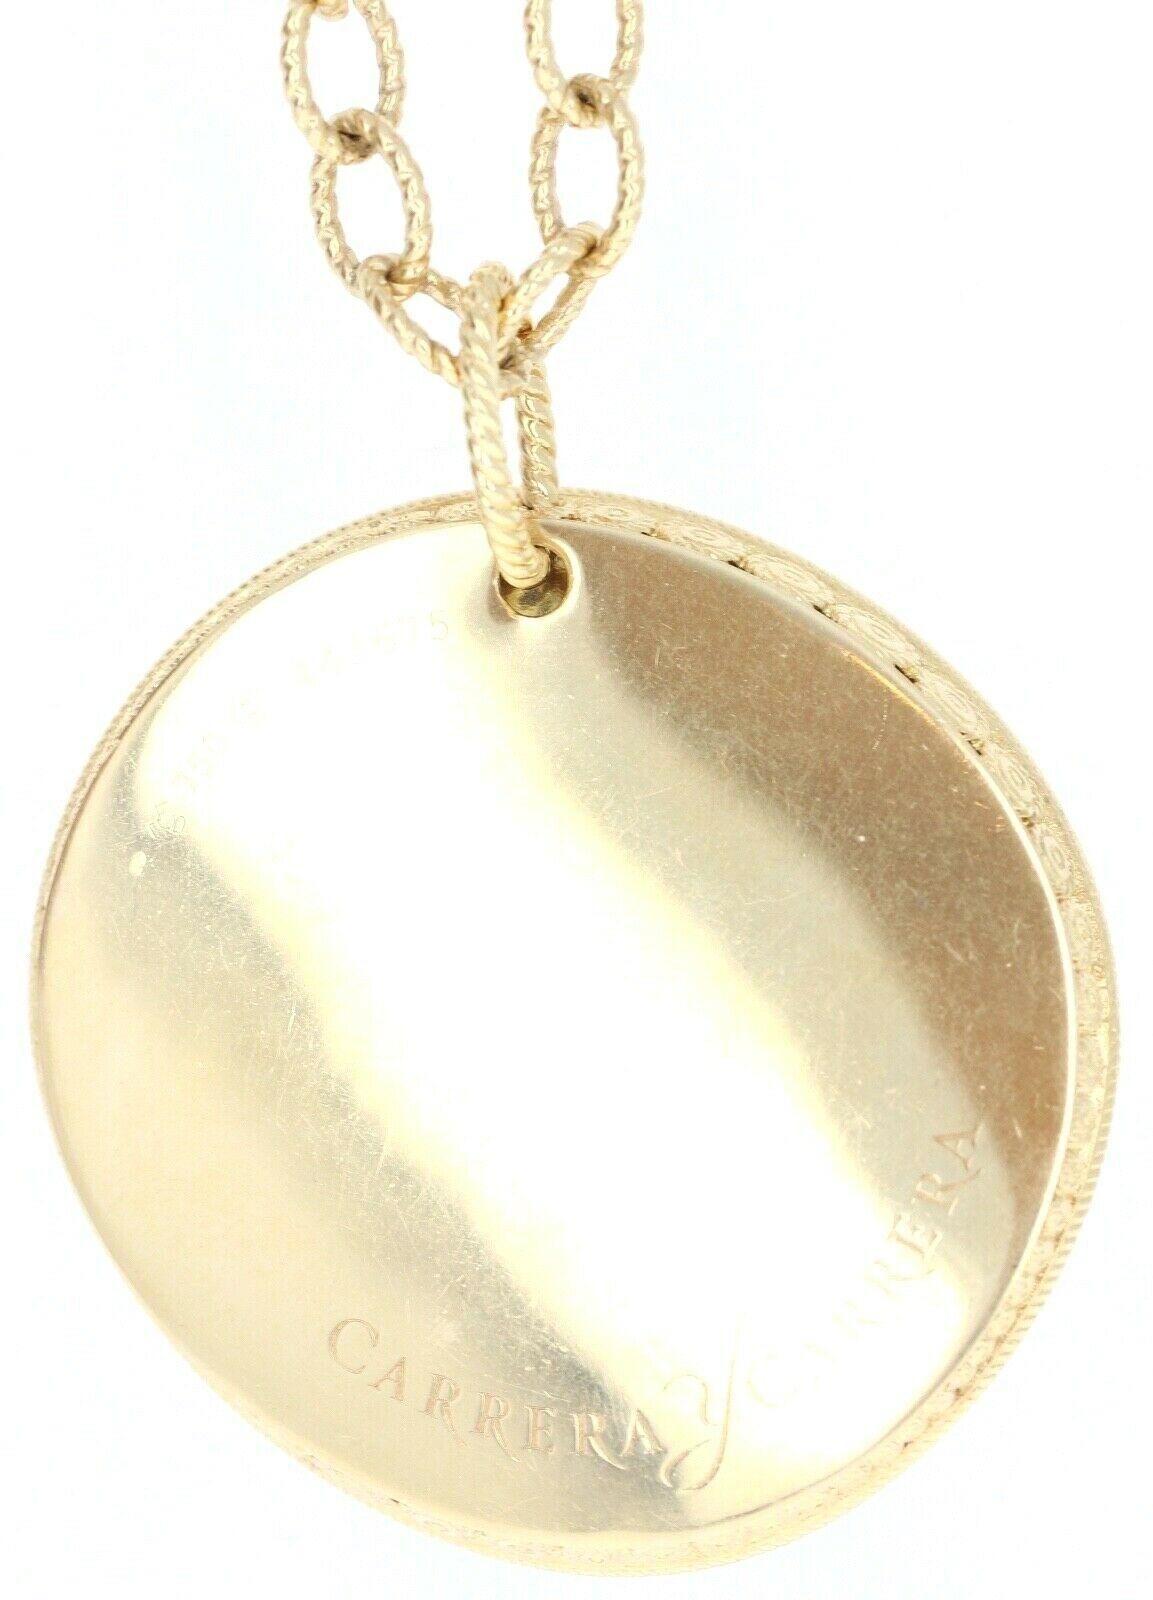 Women's Carrera 18 Karat Gold and Mother of Pearl Ruedo Maxi Pendant Necklace 123.8g